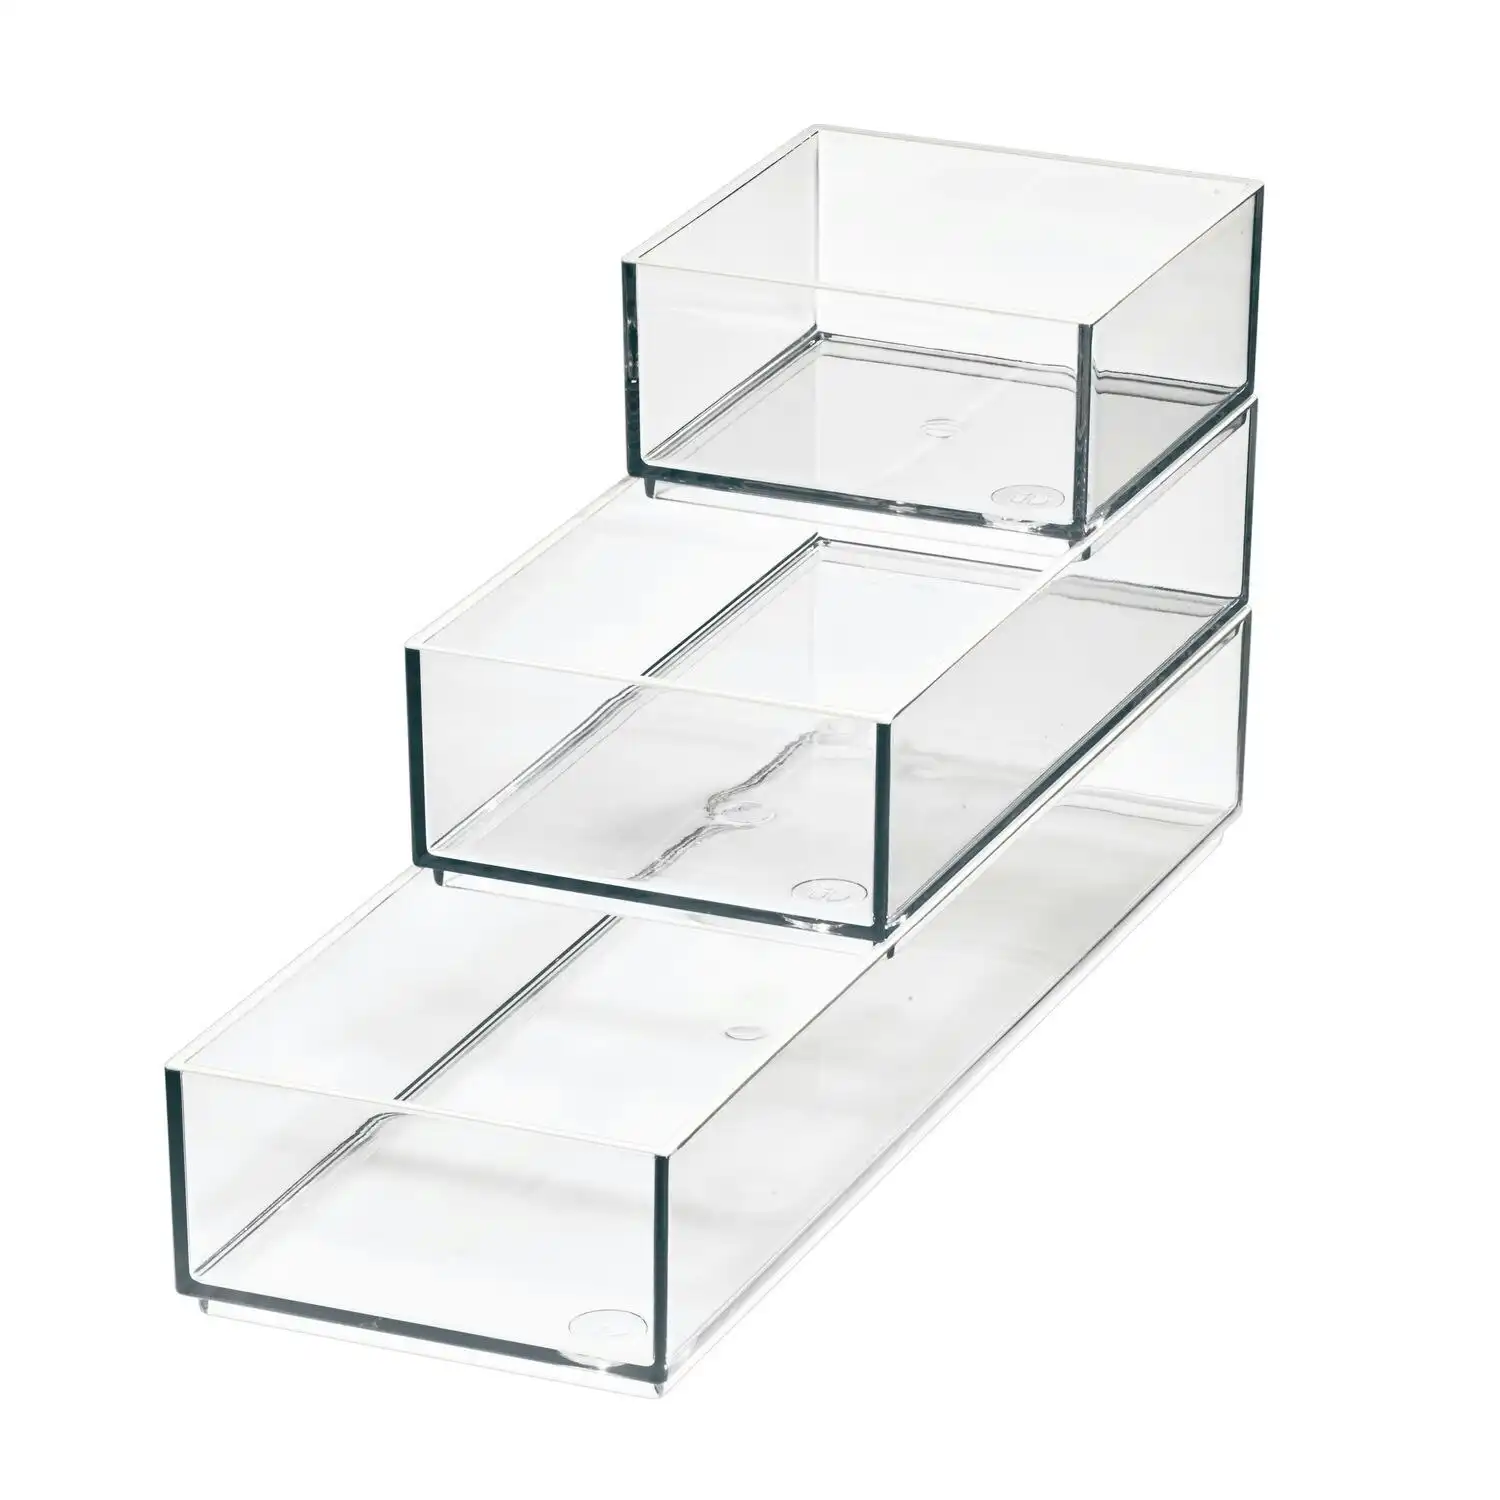 3pc Idesign Stack & Slide Cosmetic Storage Makeup Organisers Clear/Matte White